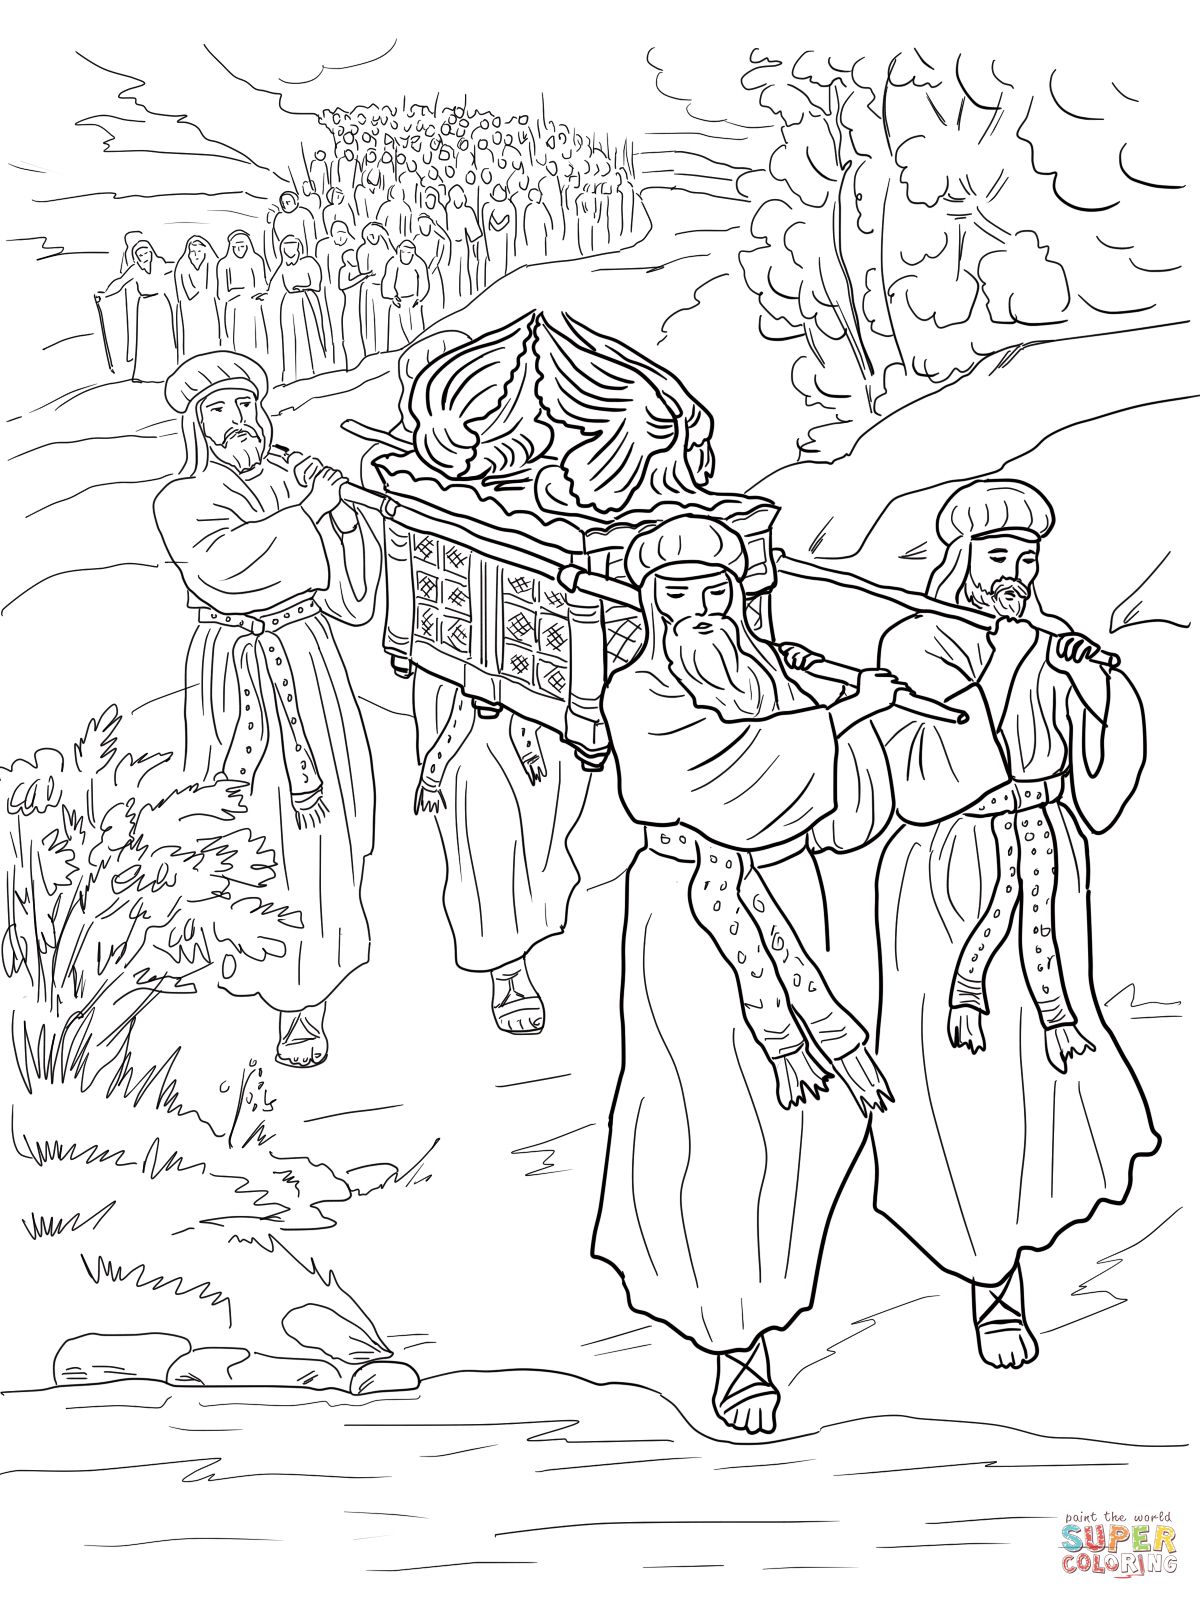 Joshua and the Israelites Cross the Jordan River coloring page